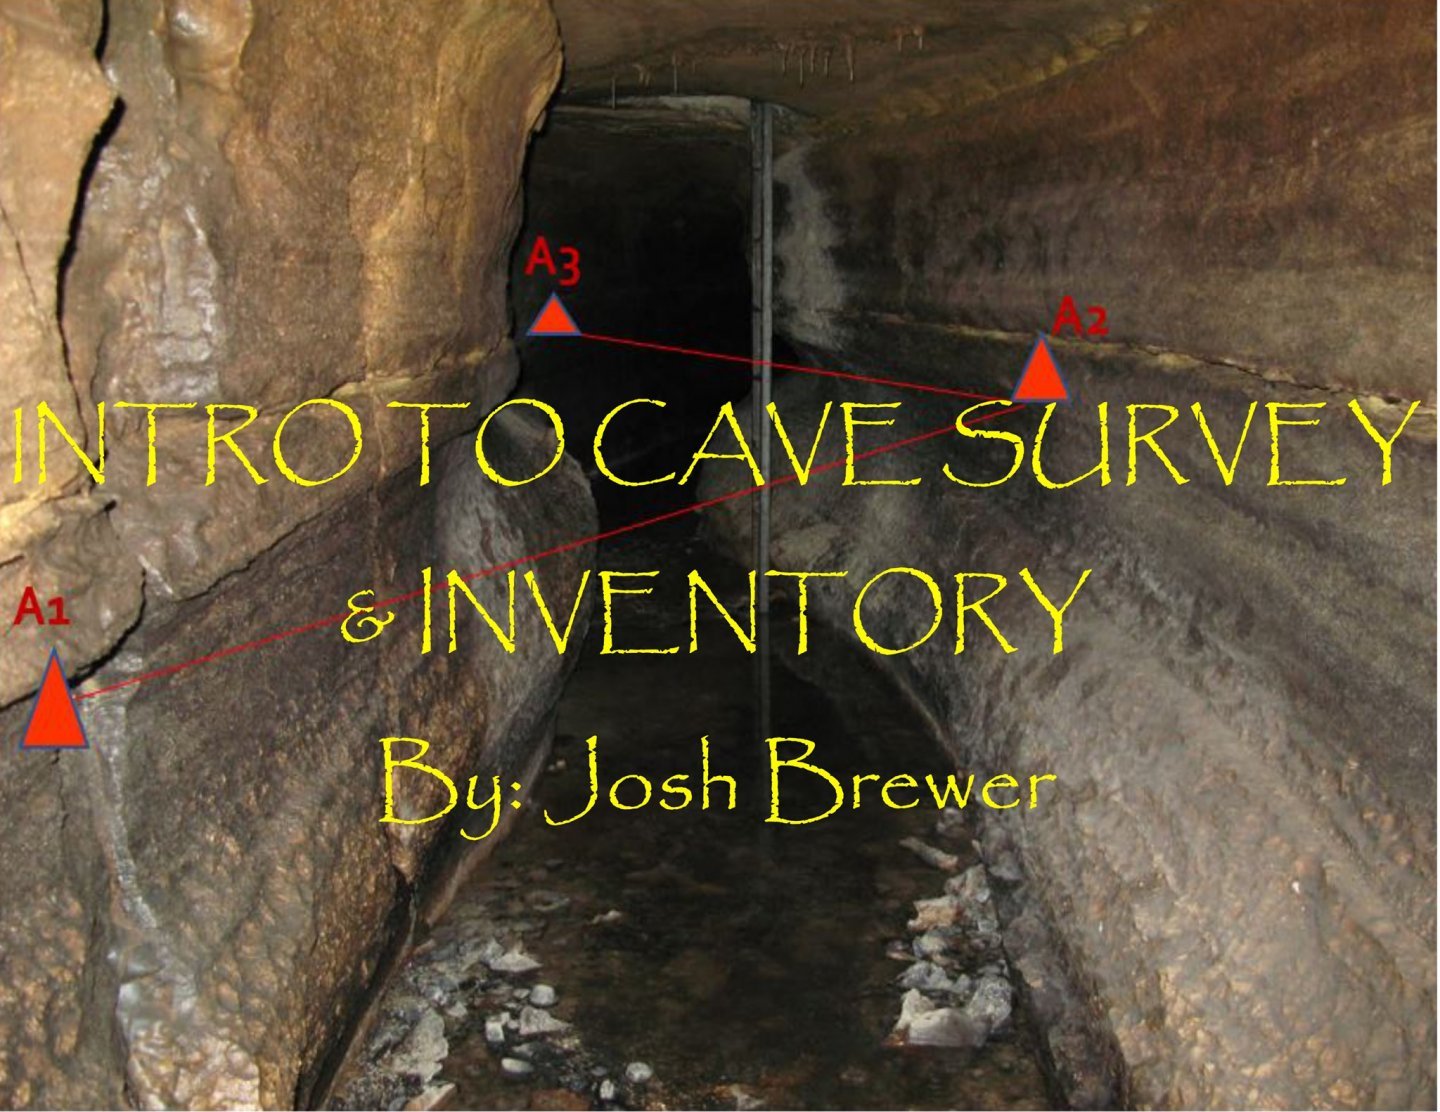 May 2020 Meeting - Intro to Cave Survey & Inventory Image